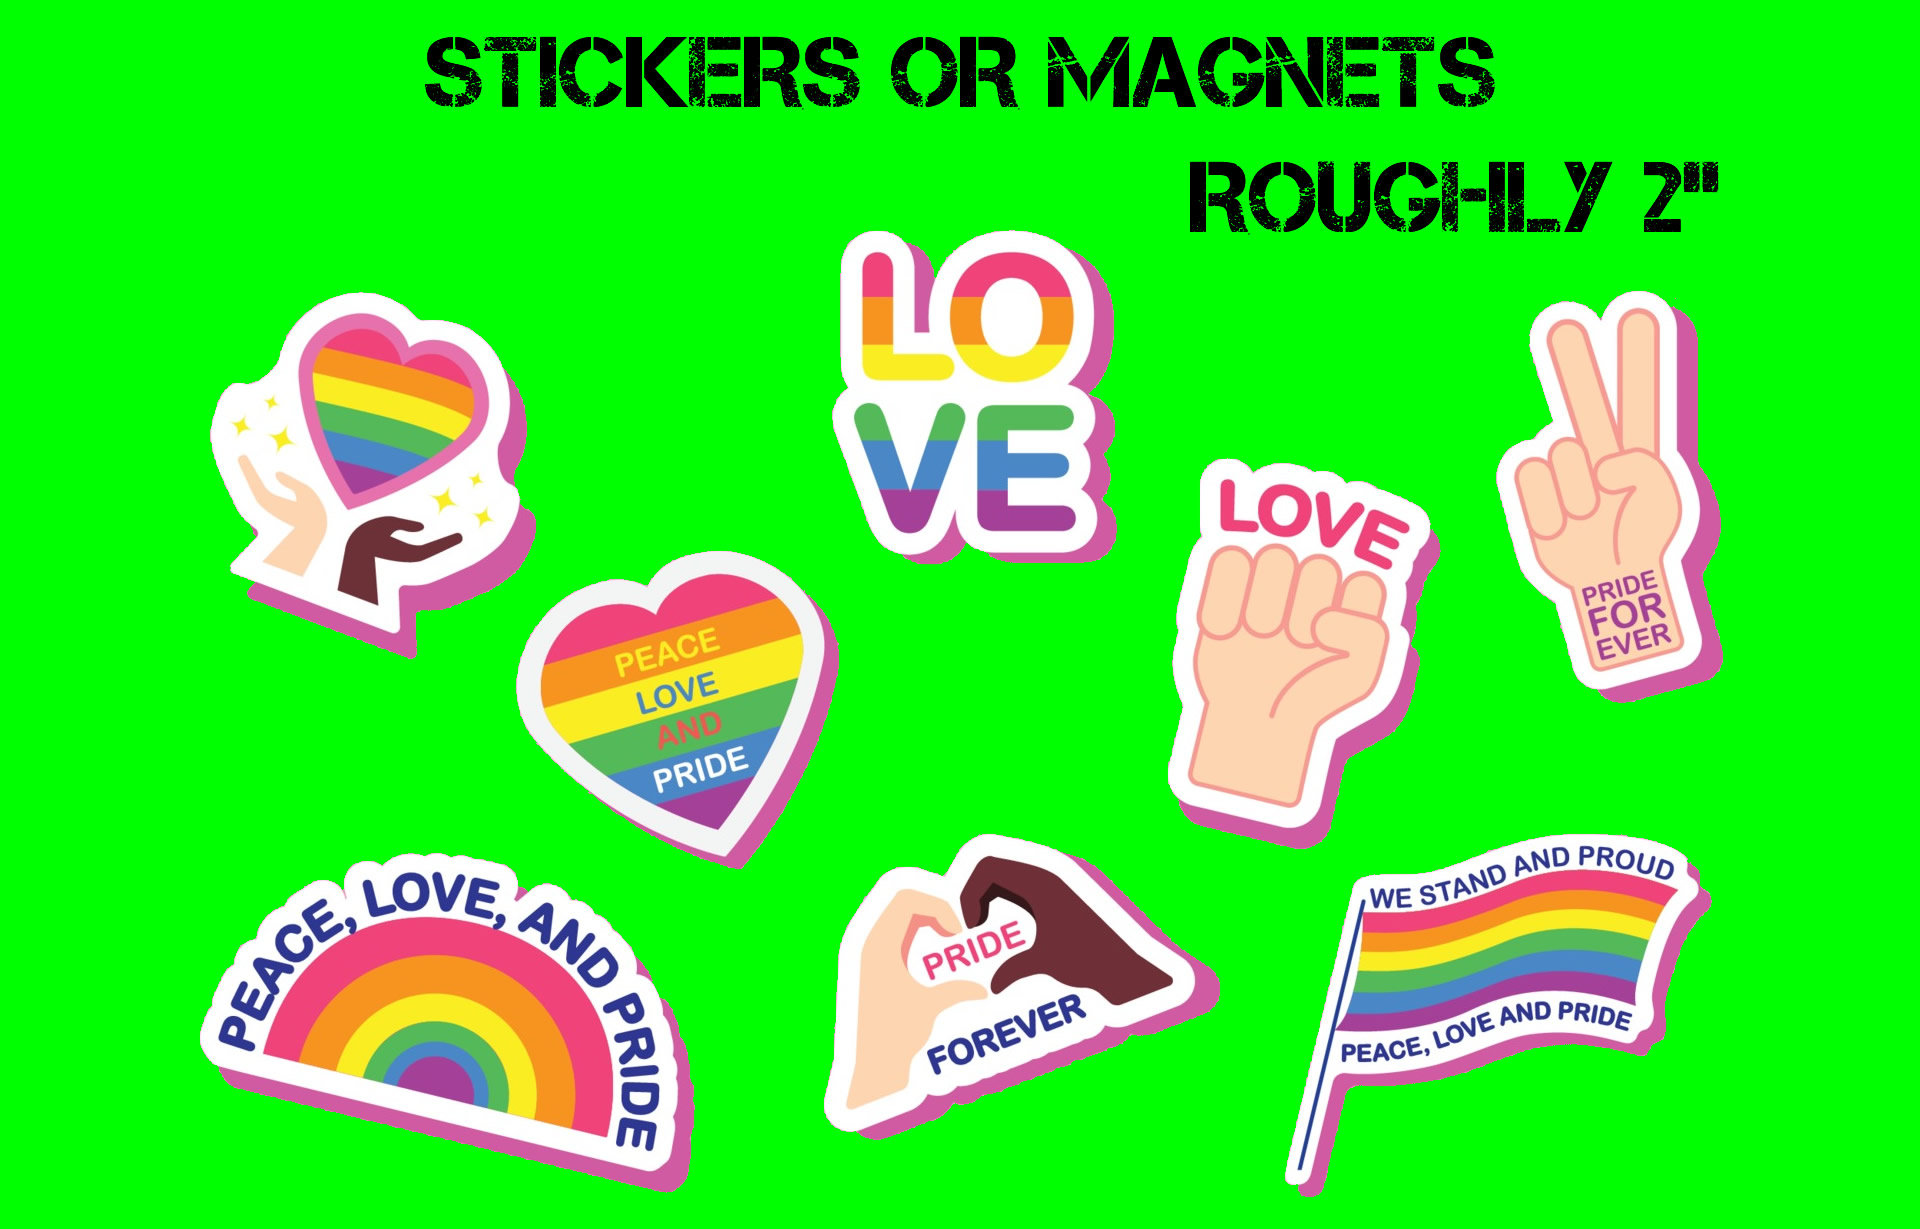 8 fun PRIDE stickers or magnets roughly 2 inch in various materials laminated